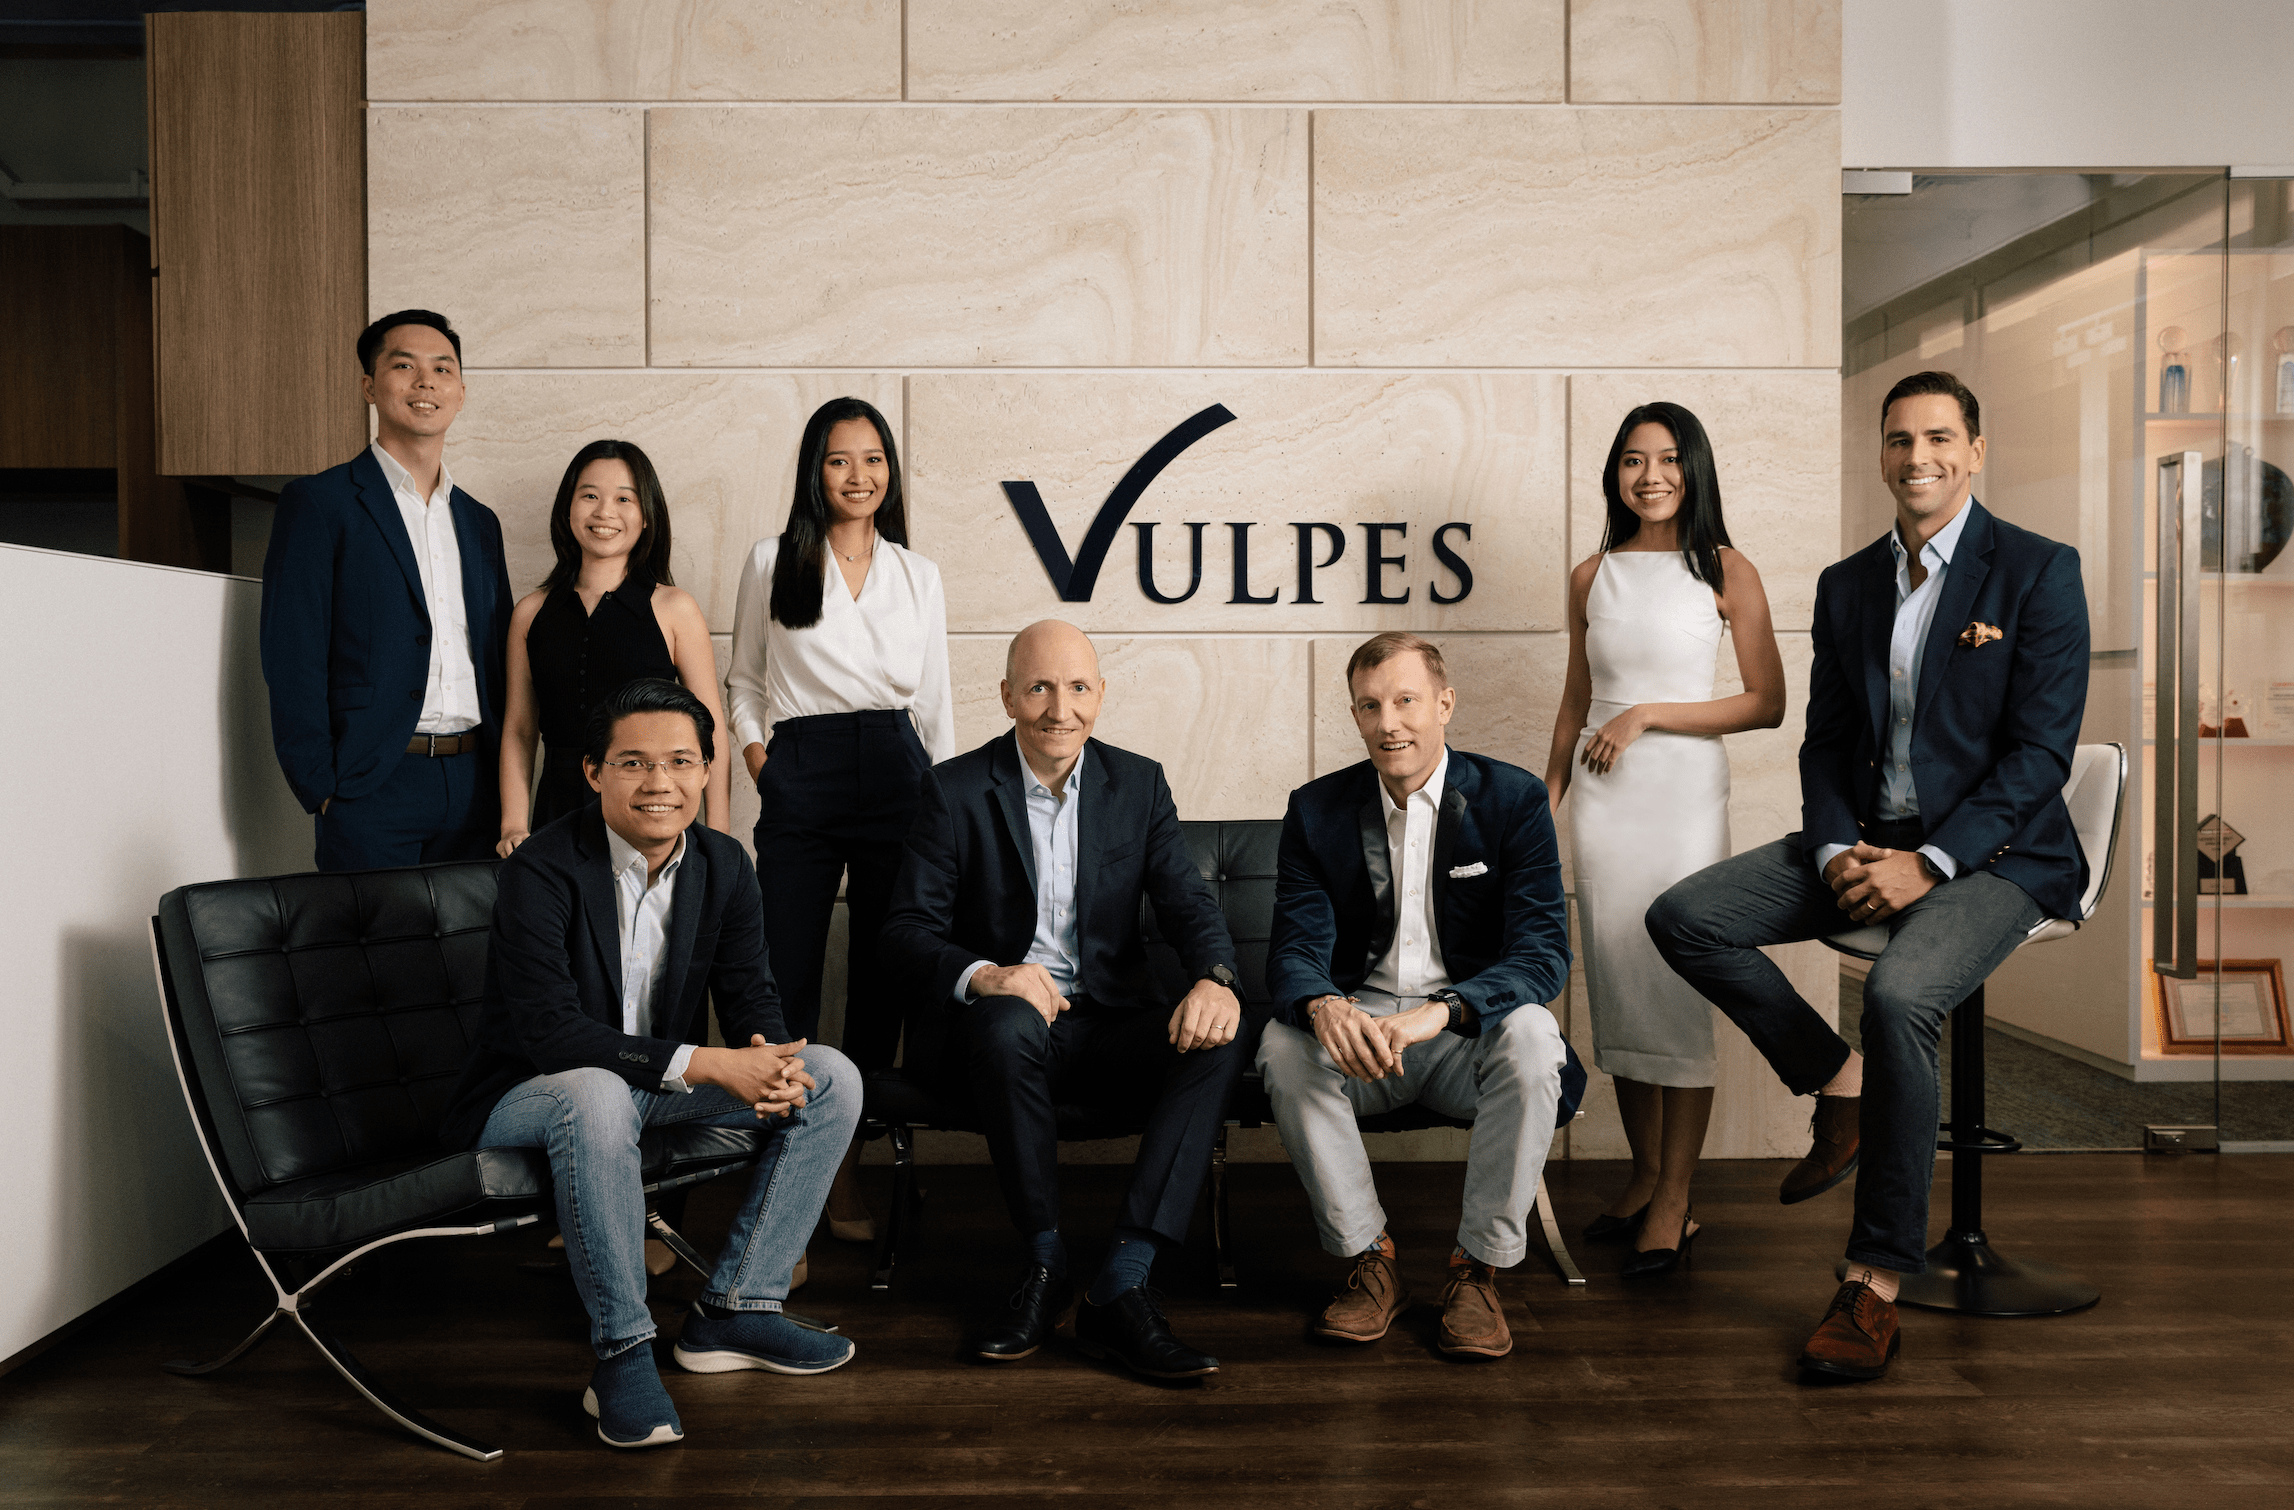 SG's Vulpes Ventures looks to launch new fund this year focusing on gender lens investing